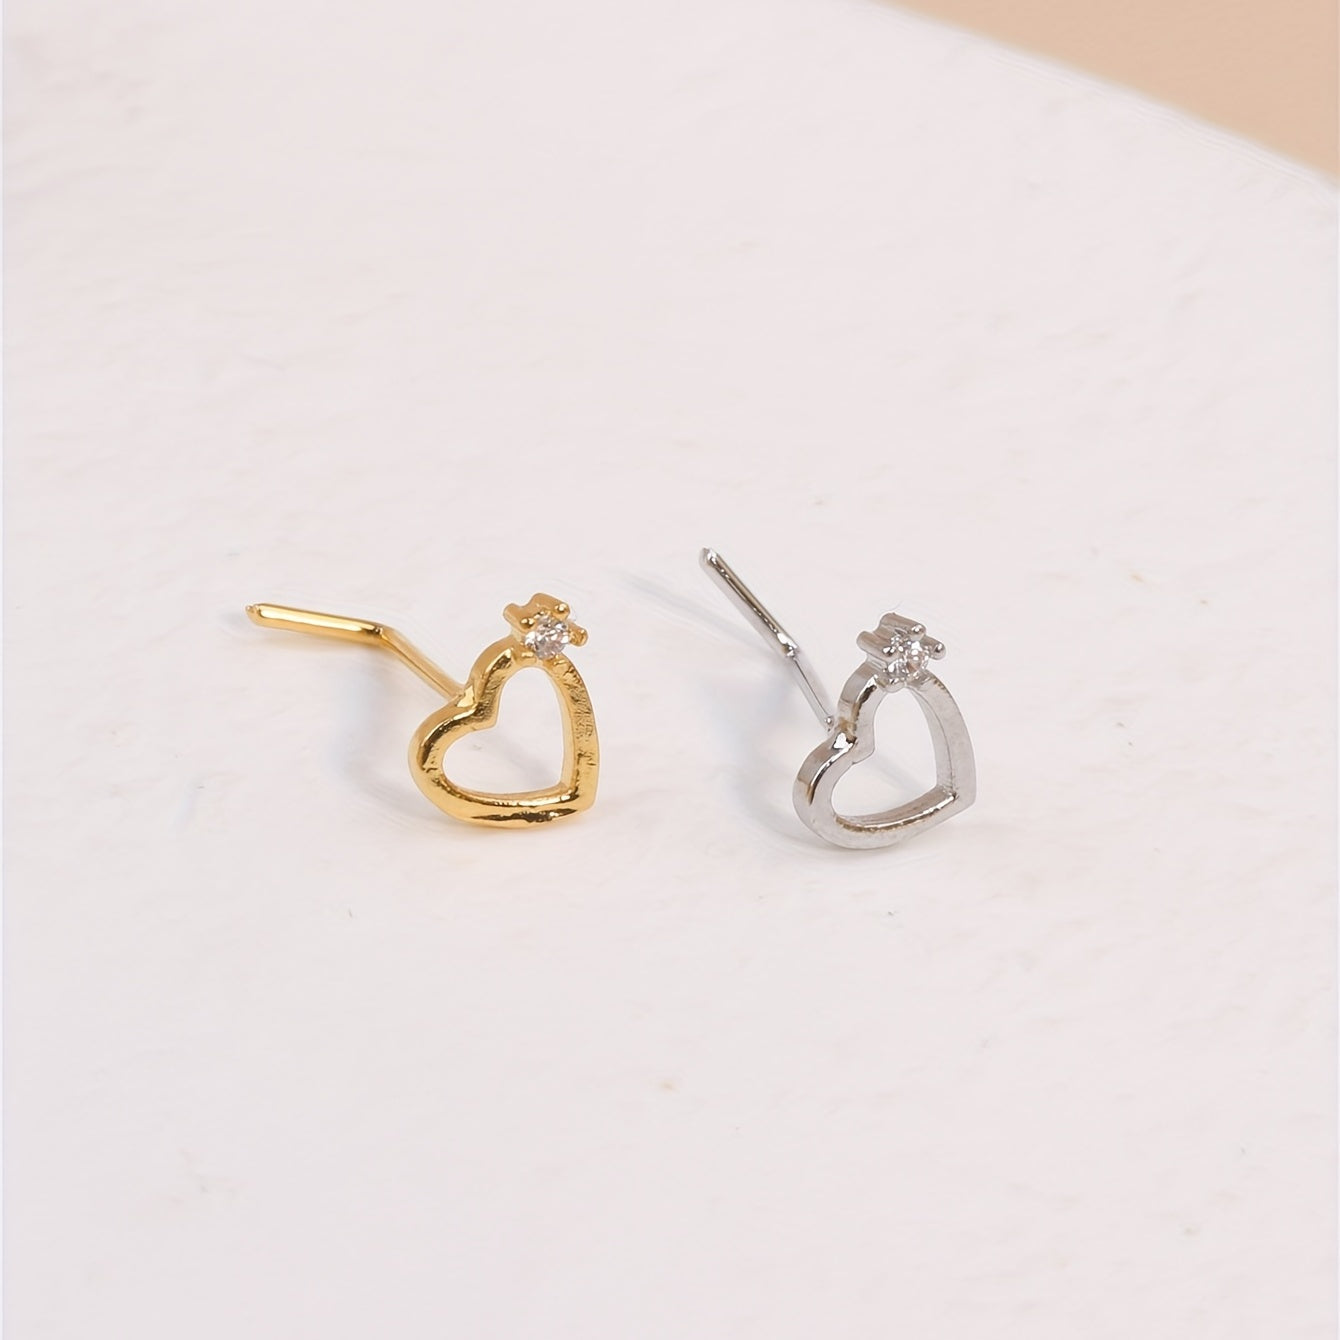 1pc Hollow Out Love Heart Shape Nose Stud Ring Inlaid Shiny Zircon For Women Men L Shape Nose Screw Body Piercing Jewelry